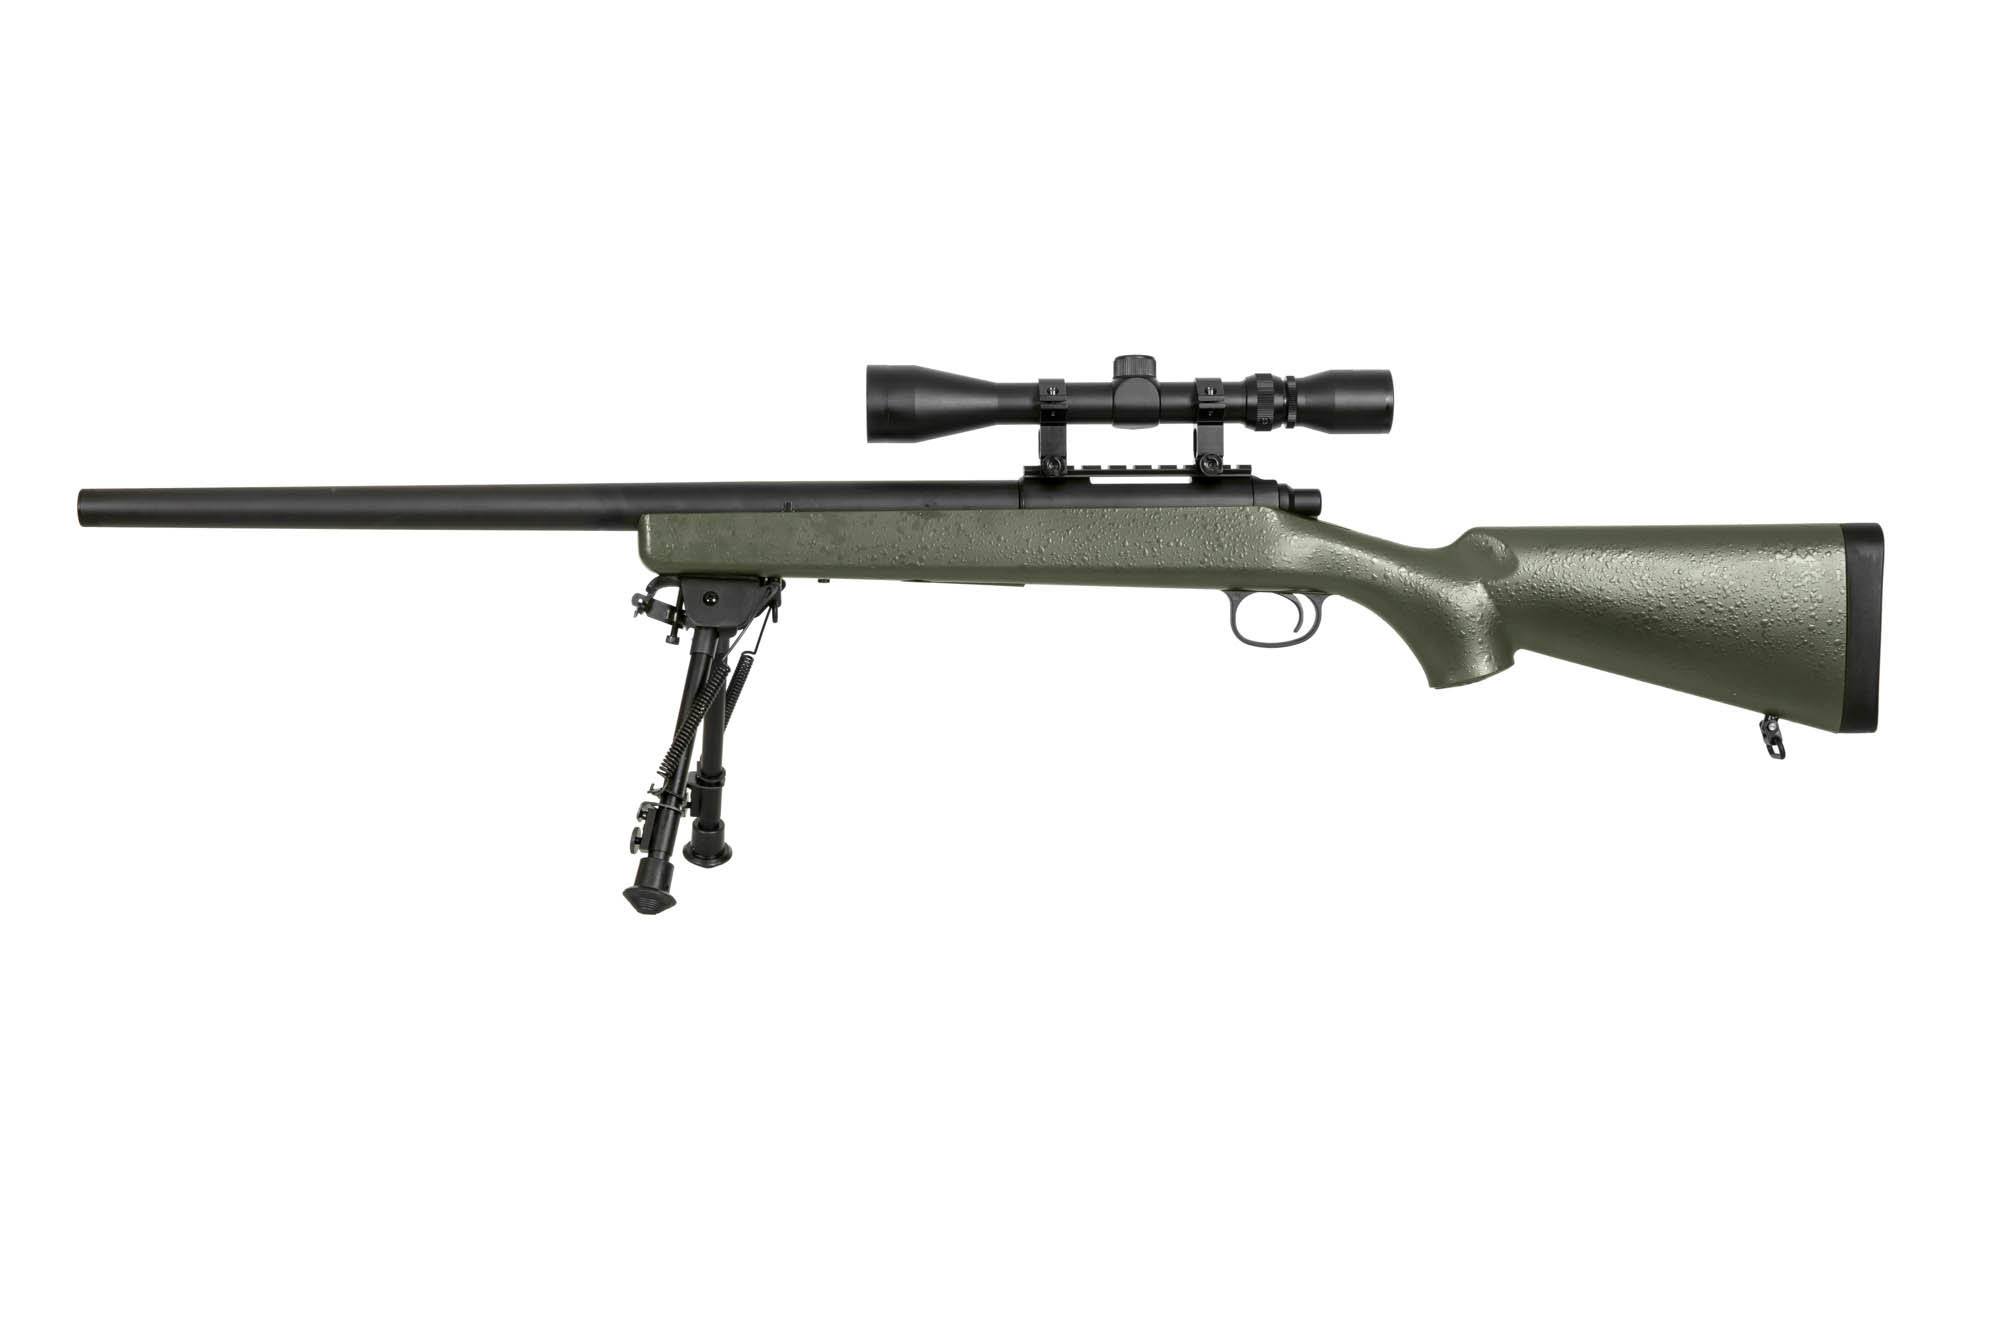  Airsoft Sniper Rifle SW-10 